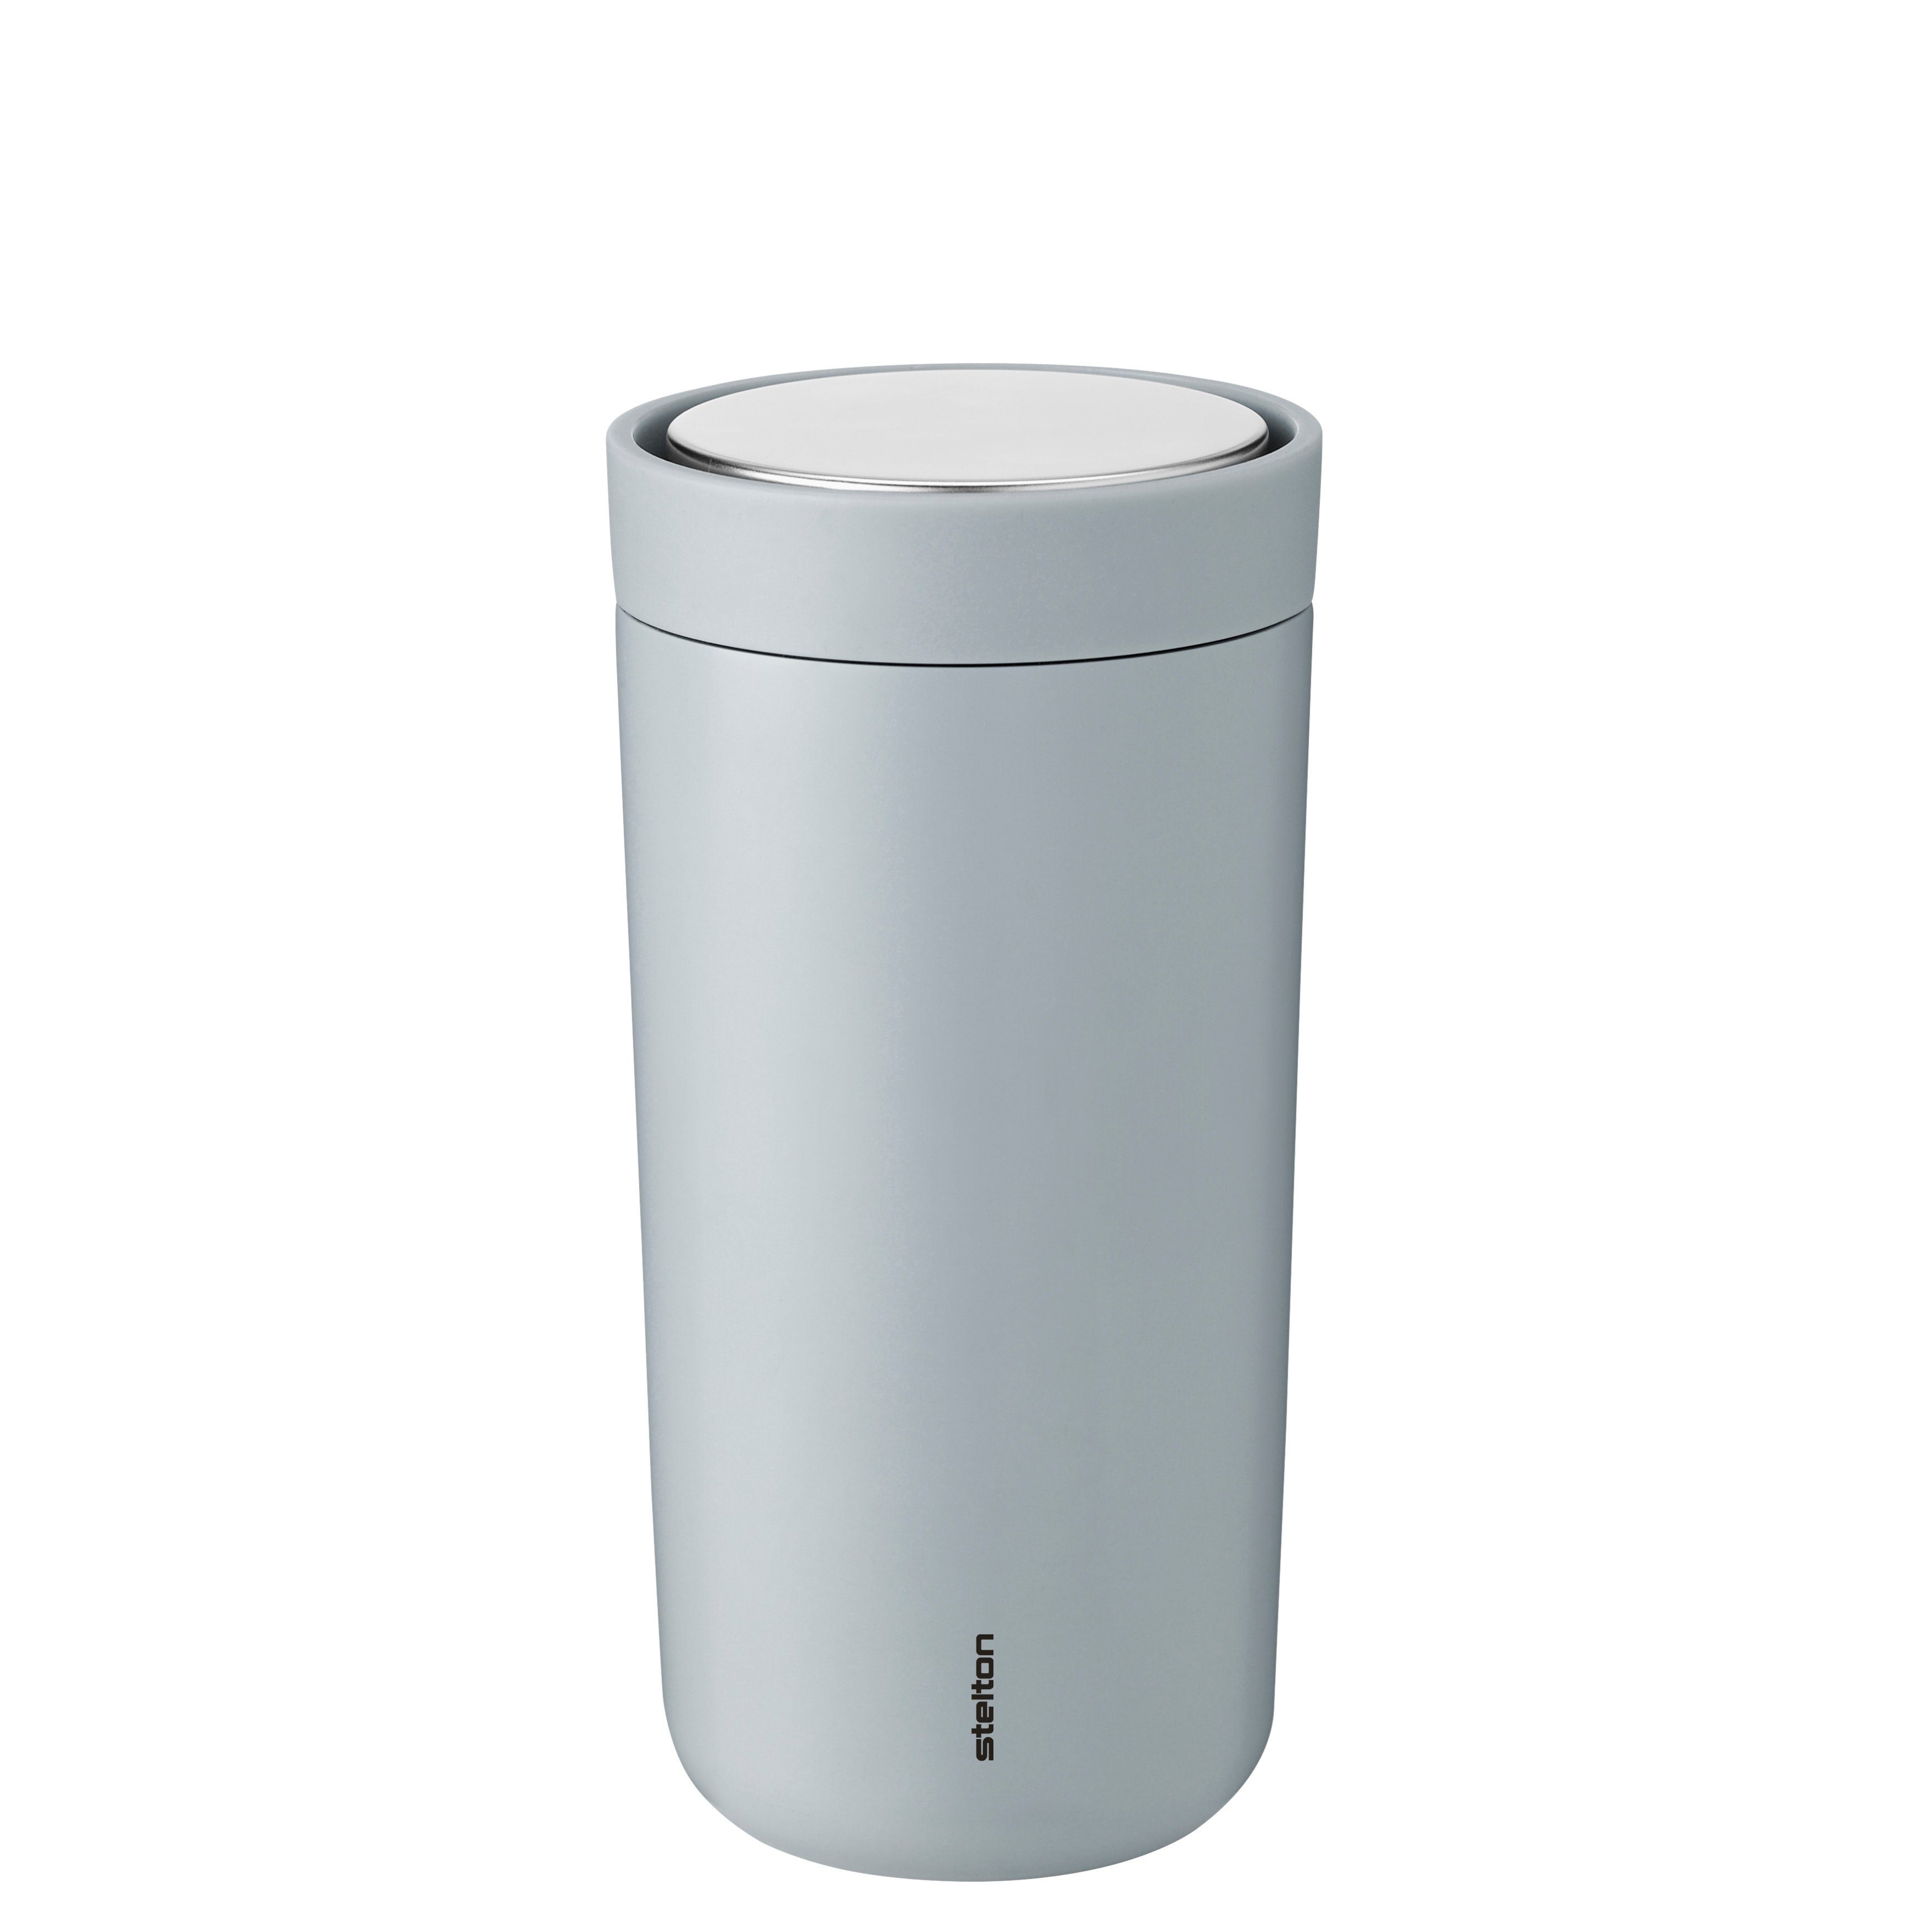 Go Edelstahl Stelton Soft Click Stelton Thermobecher Thermobecher, To cloud